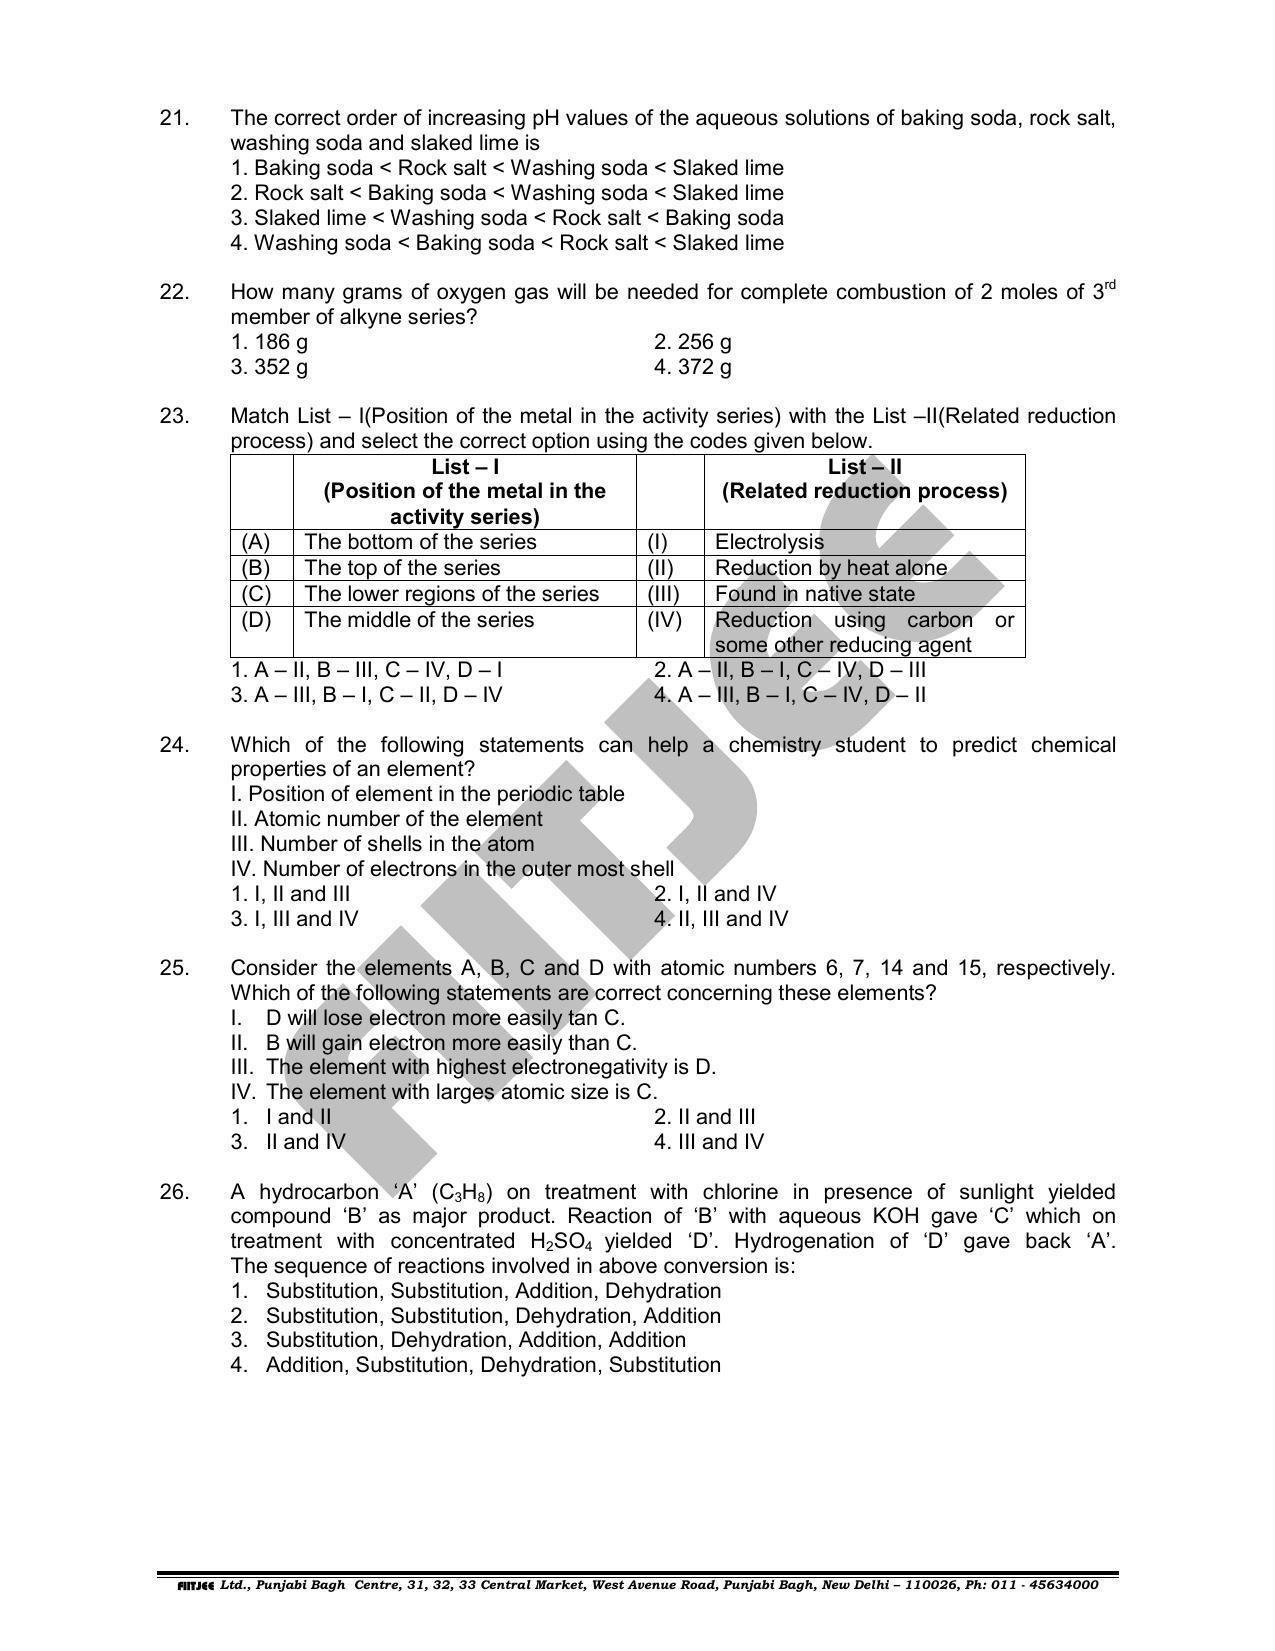 NTSE 2018 (Stage II) SAT Question Paper (May 13, 2018) - Page 4